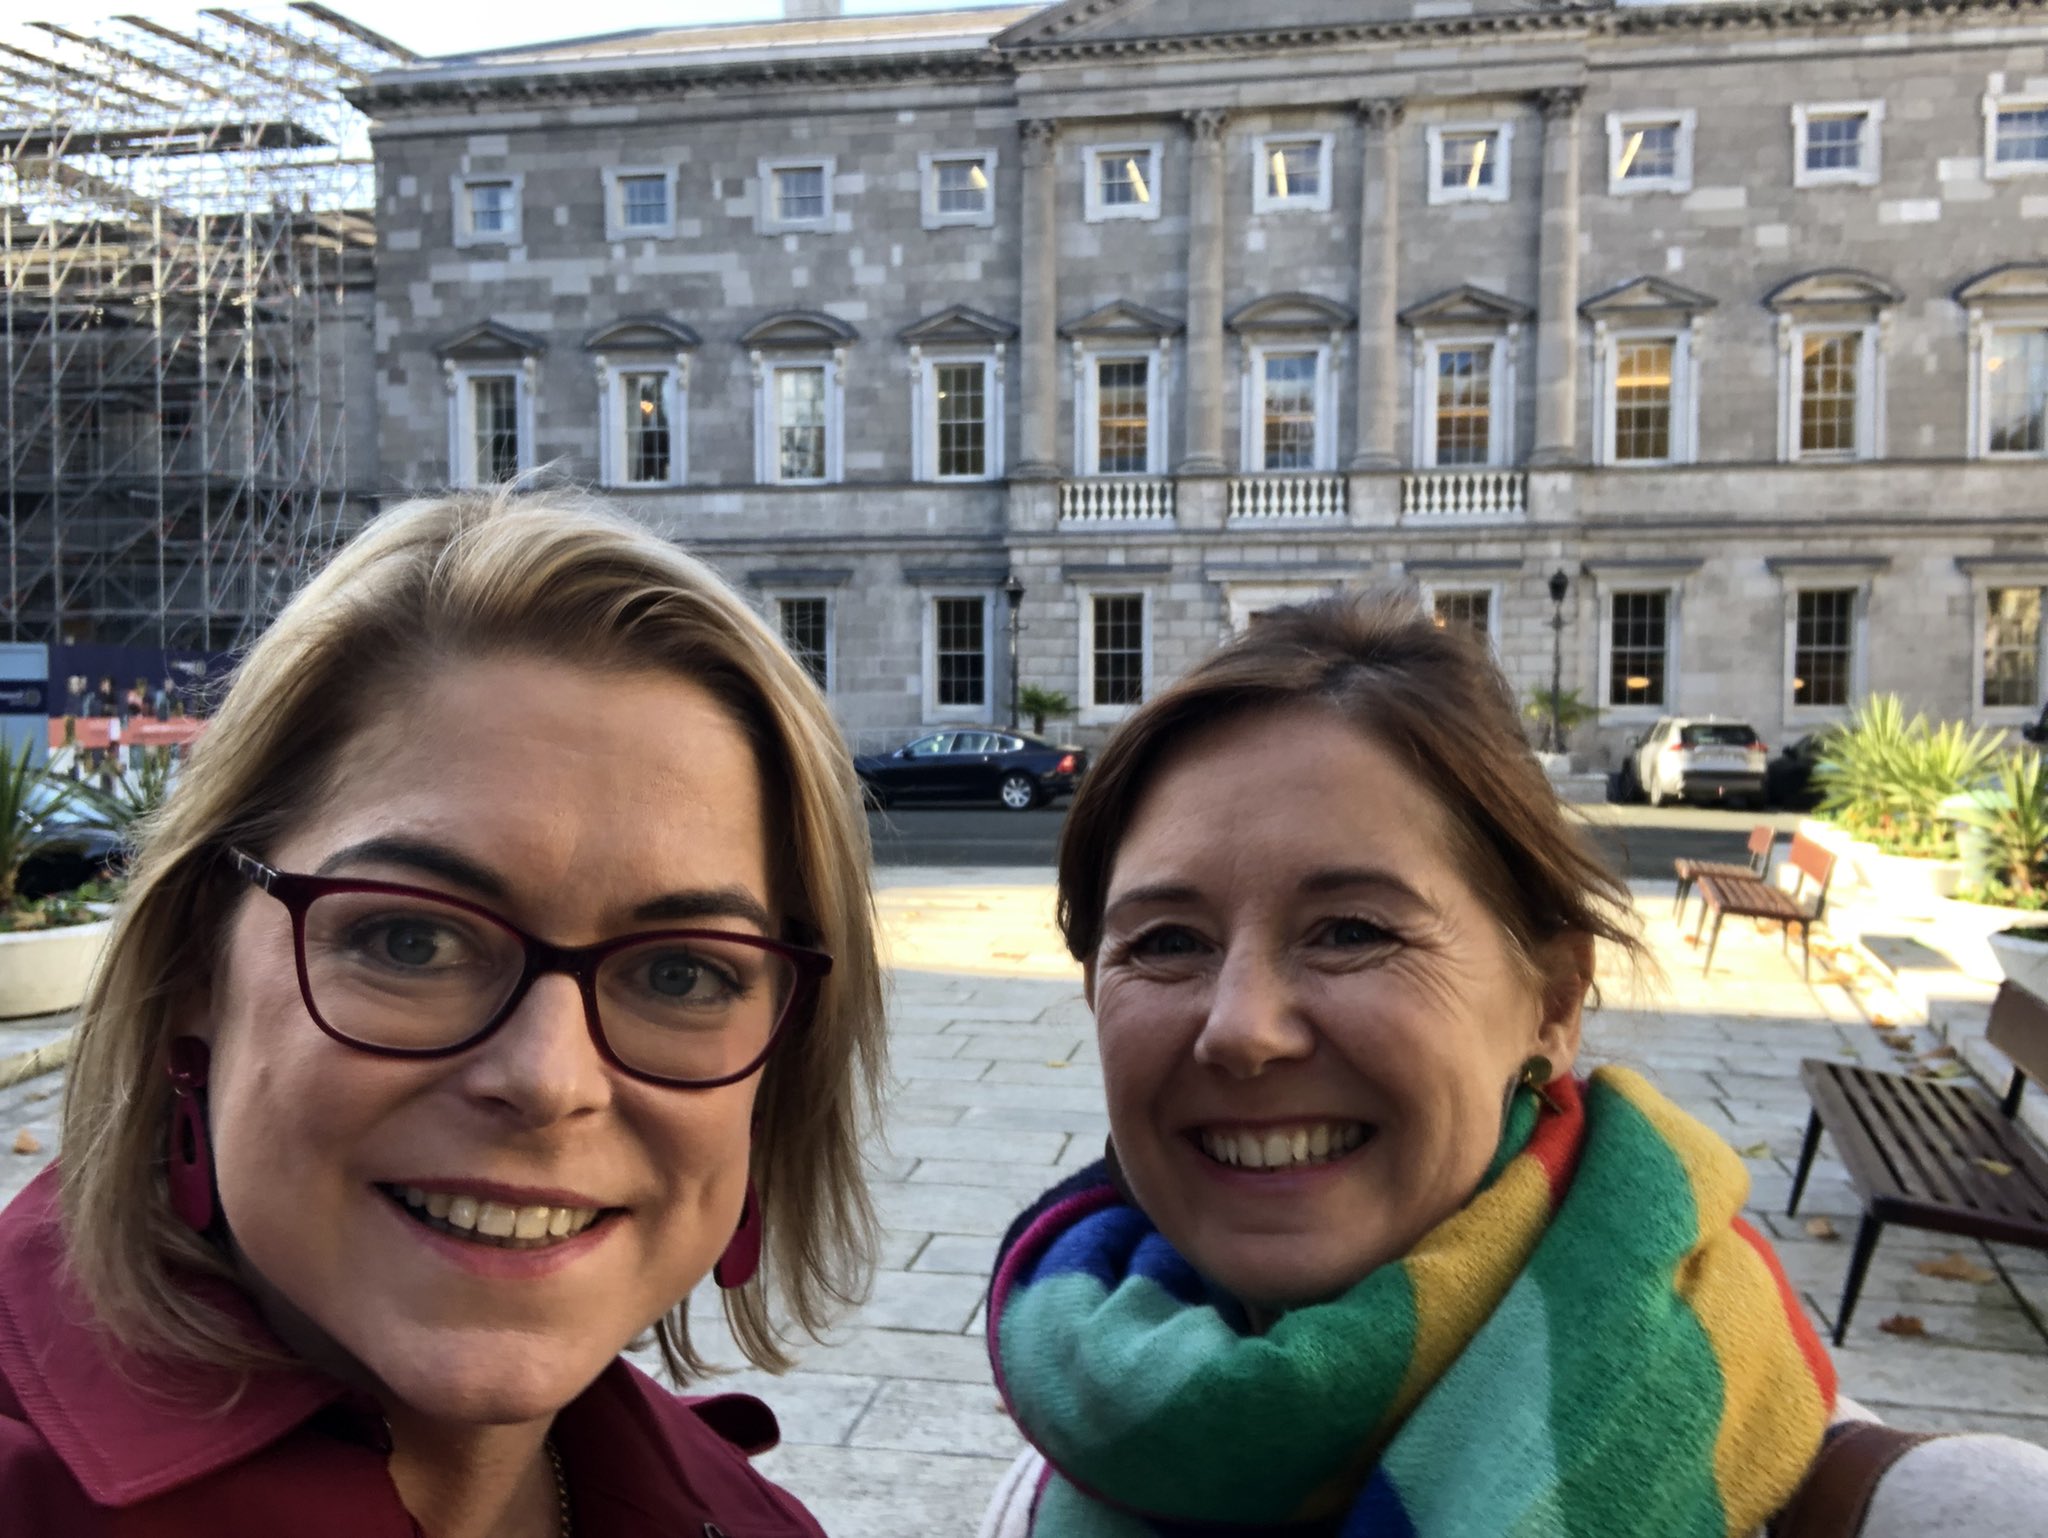 Professor Louise Crowley, Director of the UCC Bystander Intervention Programme, and Céline Griffin, Manager of the same programme, pictured in front of the Oireachtas